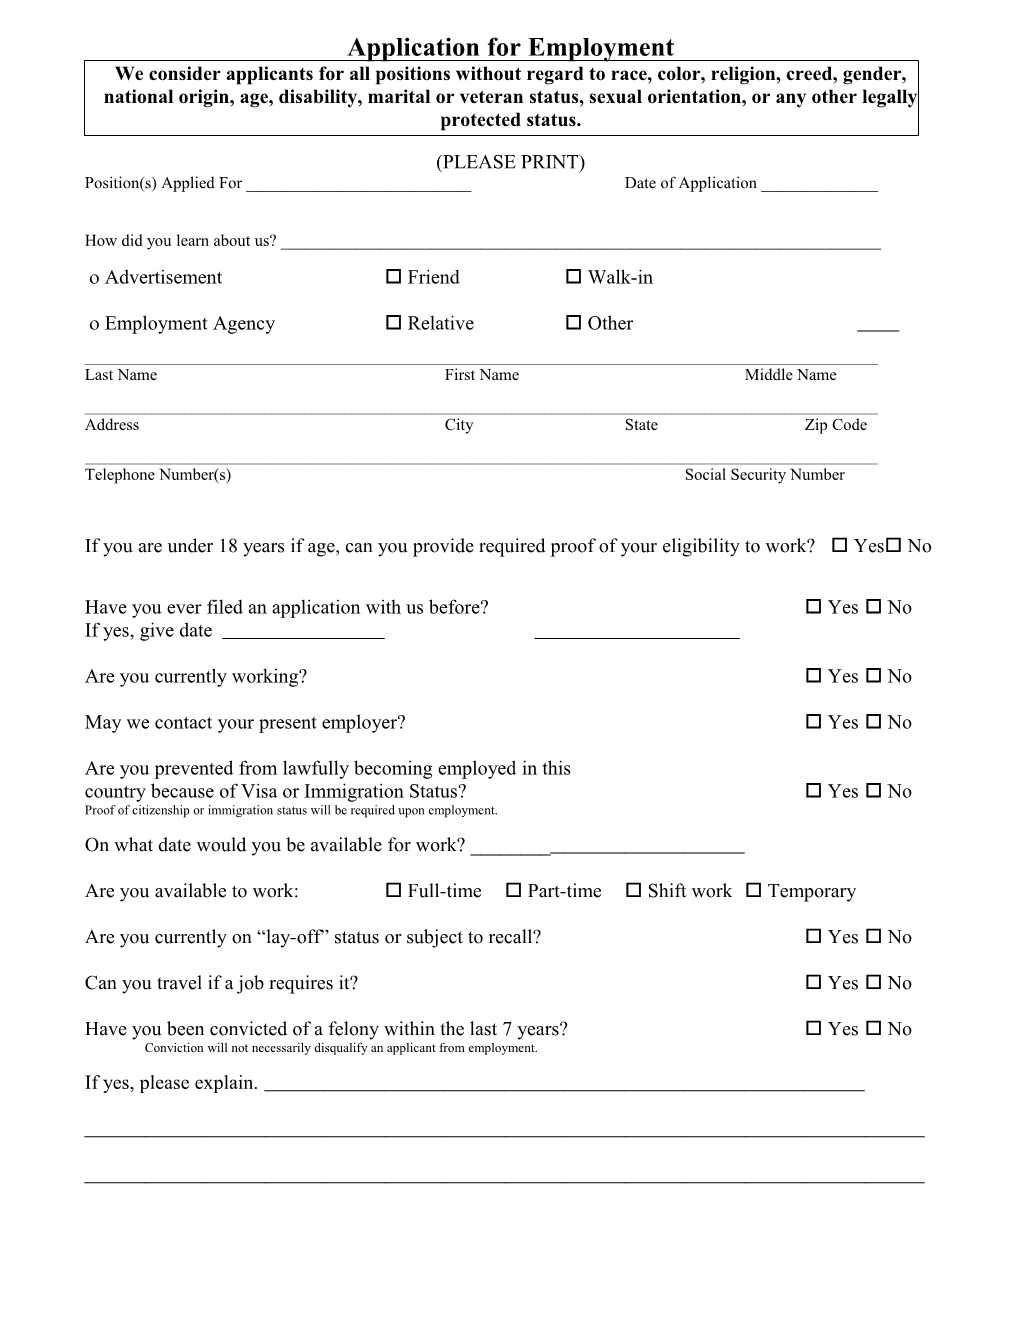 Application for Employment s4